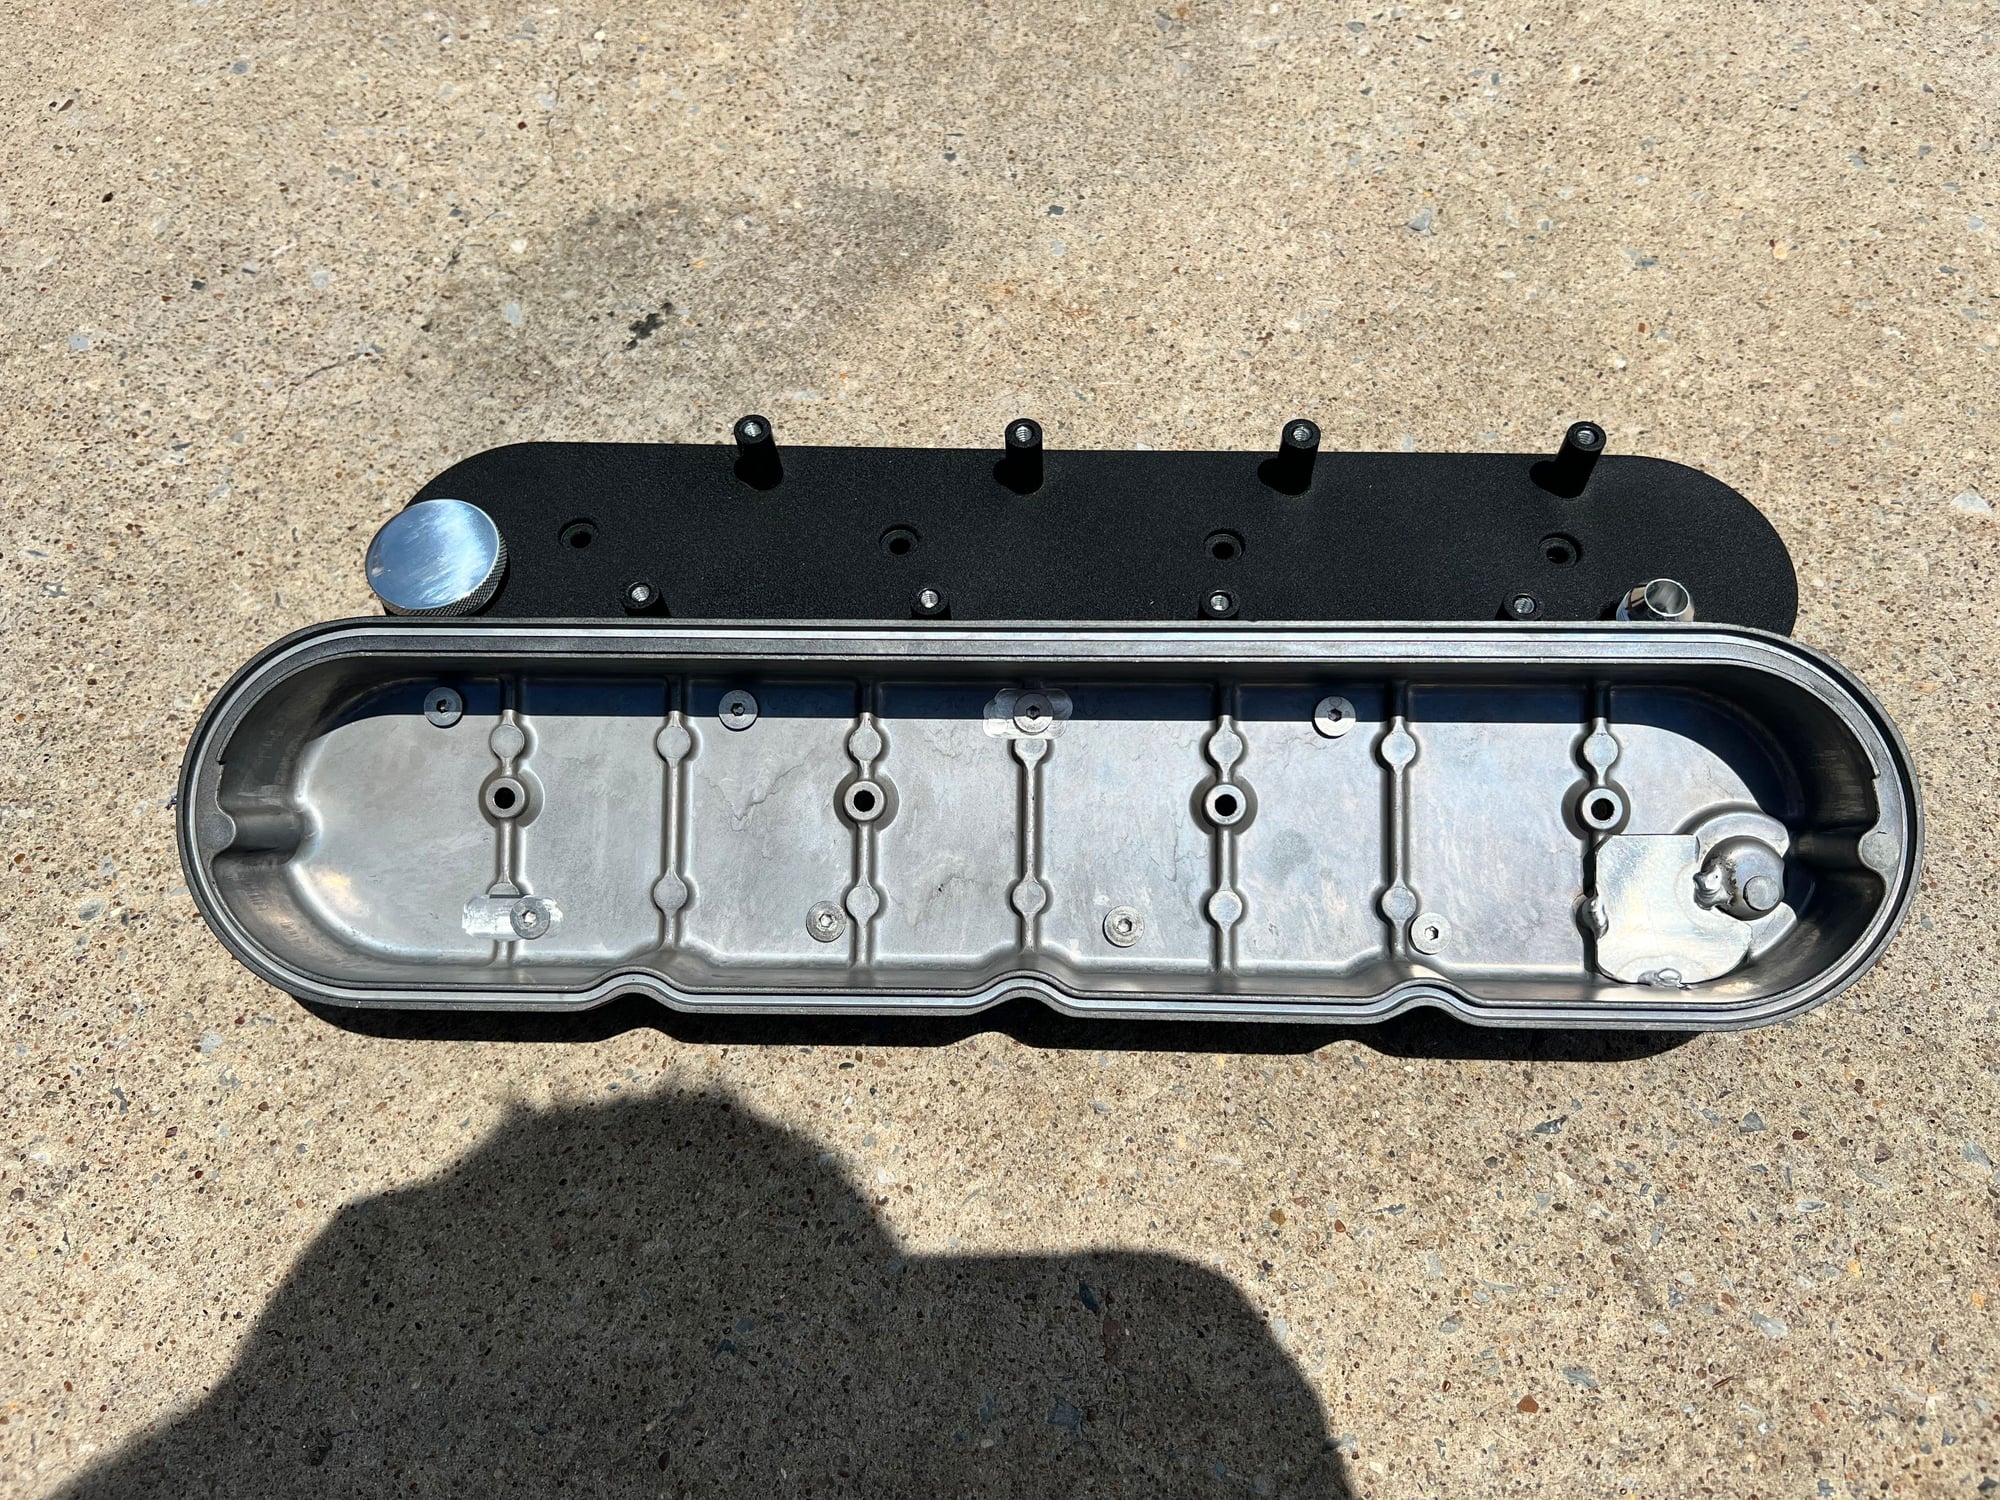 Miscellaneous - LS Aftermarket Valve Covers - 10AN Bungs - New - 0  All Models - Royse City, TX 75189, United States